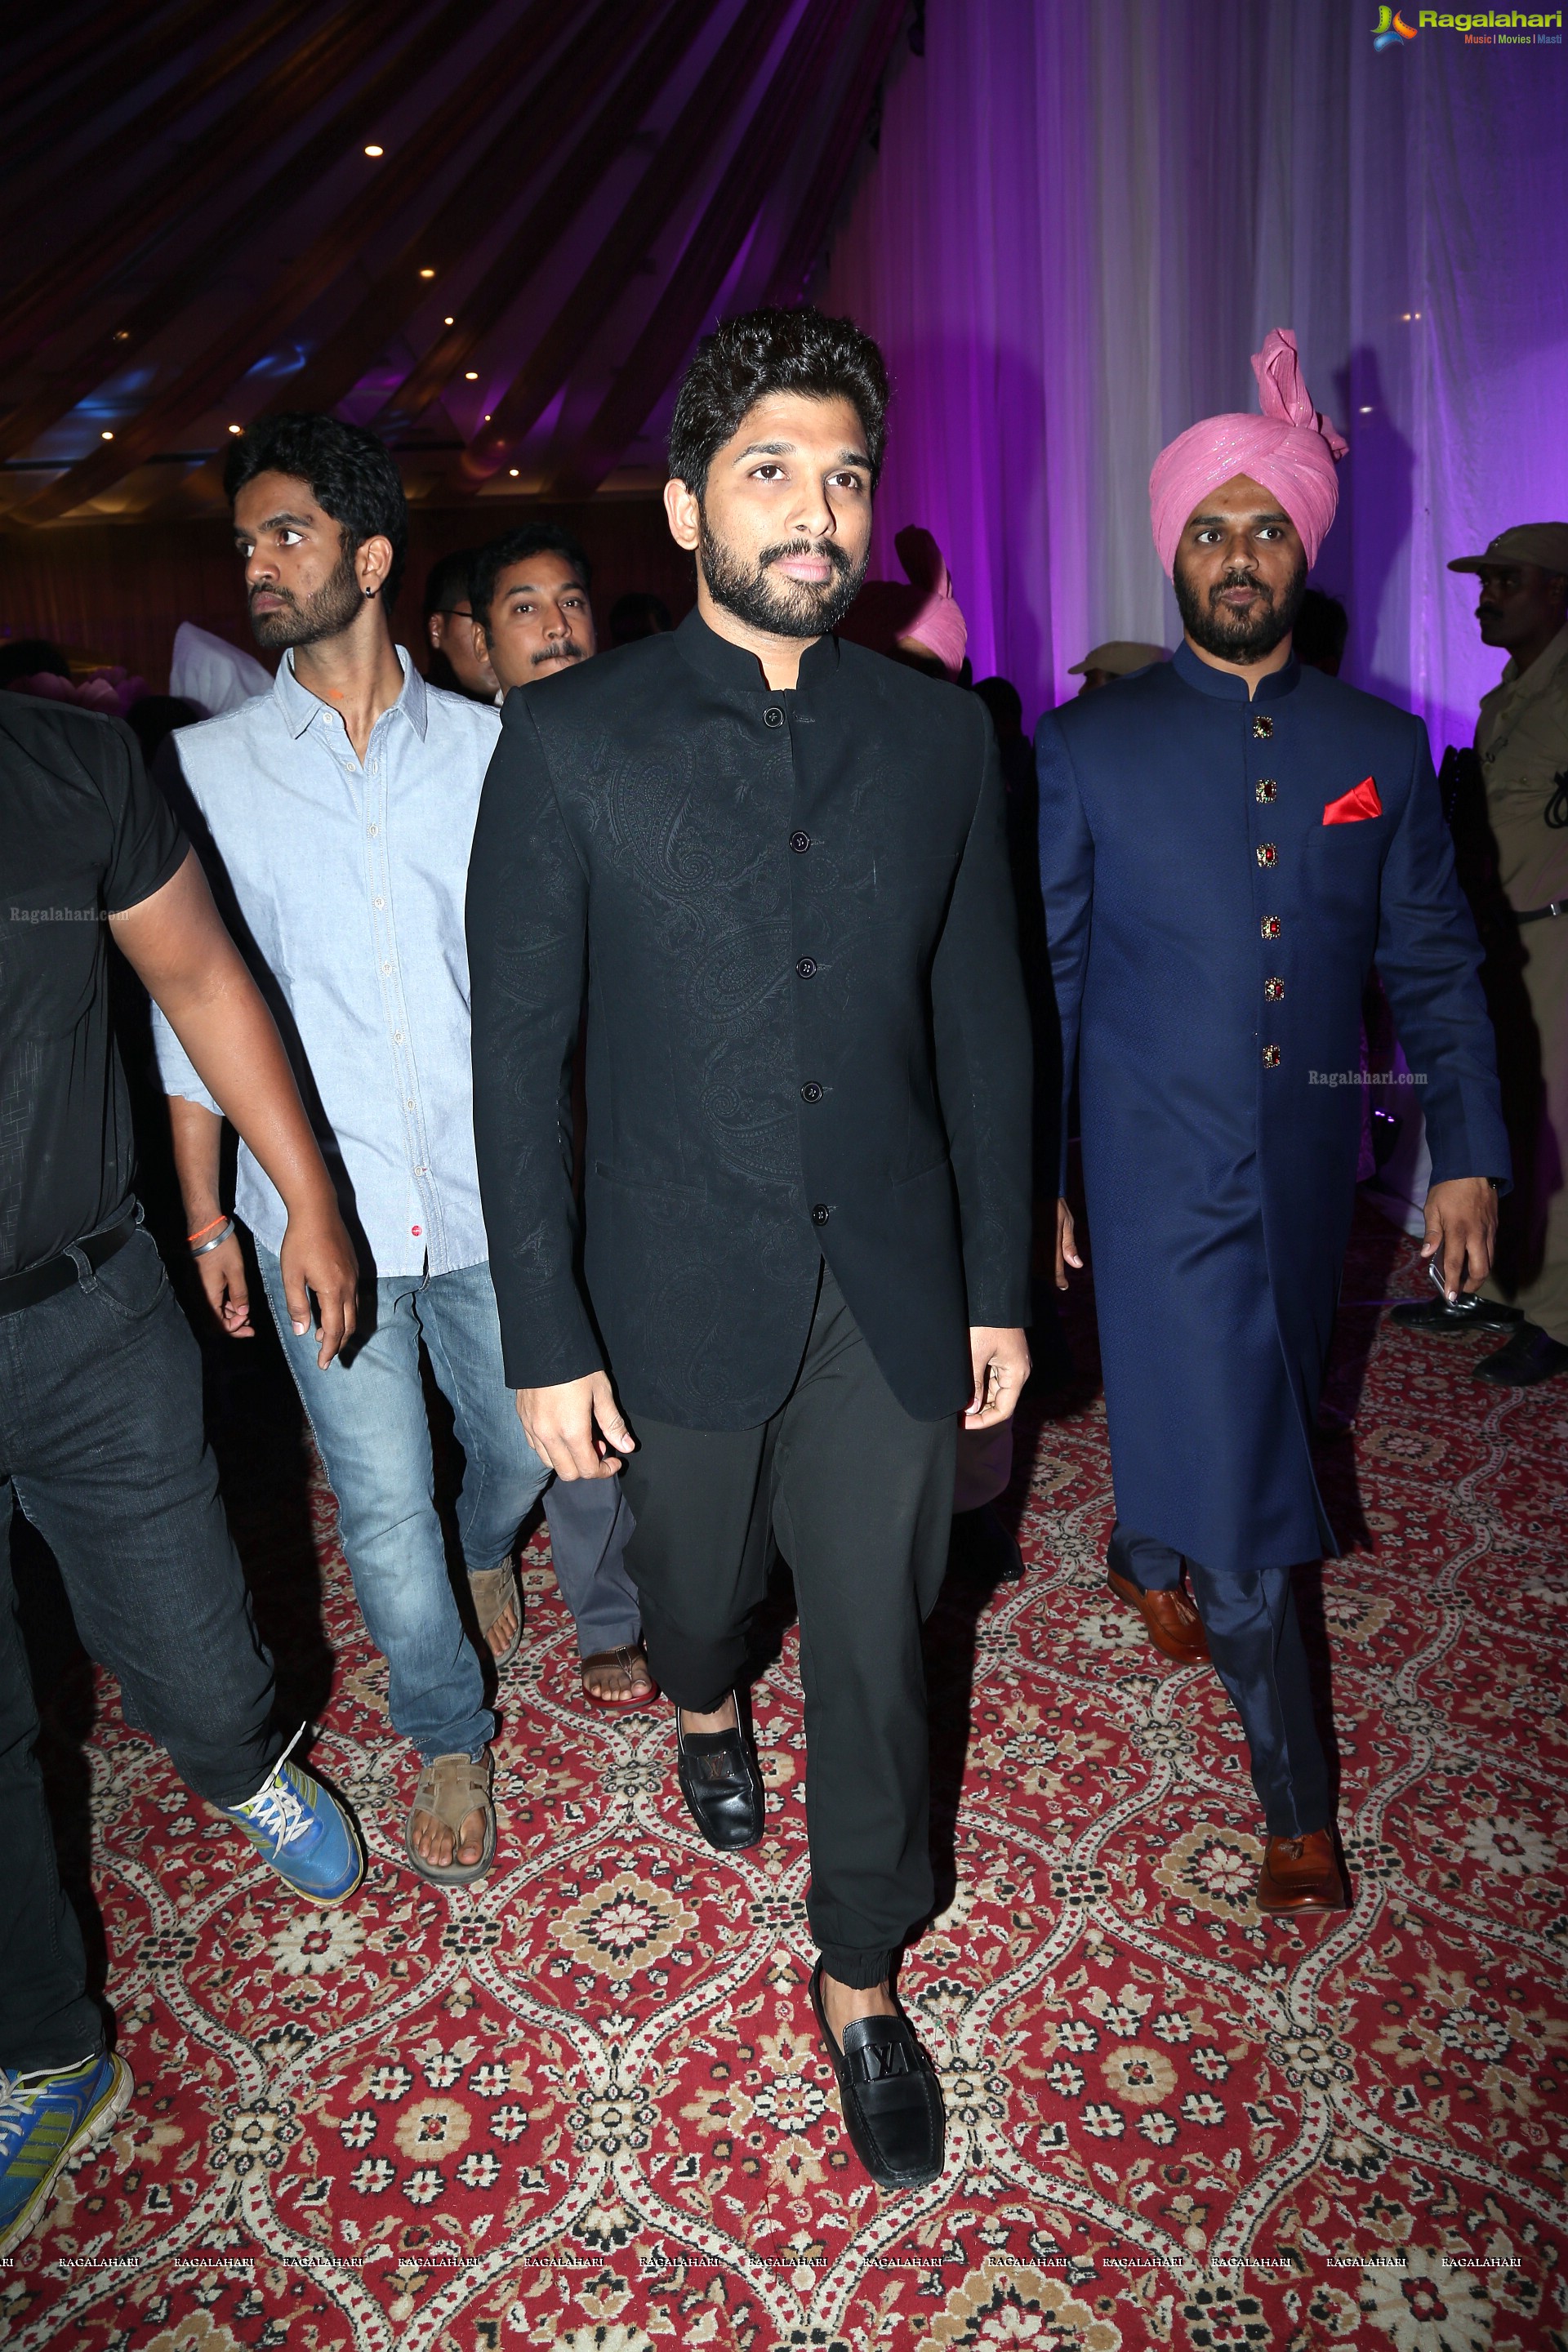 Syed Ismail Ali's Daughter Wedding at SS Convention, Shamshabad, Hyderabad